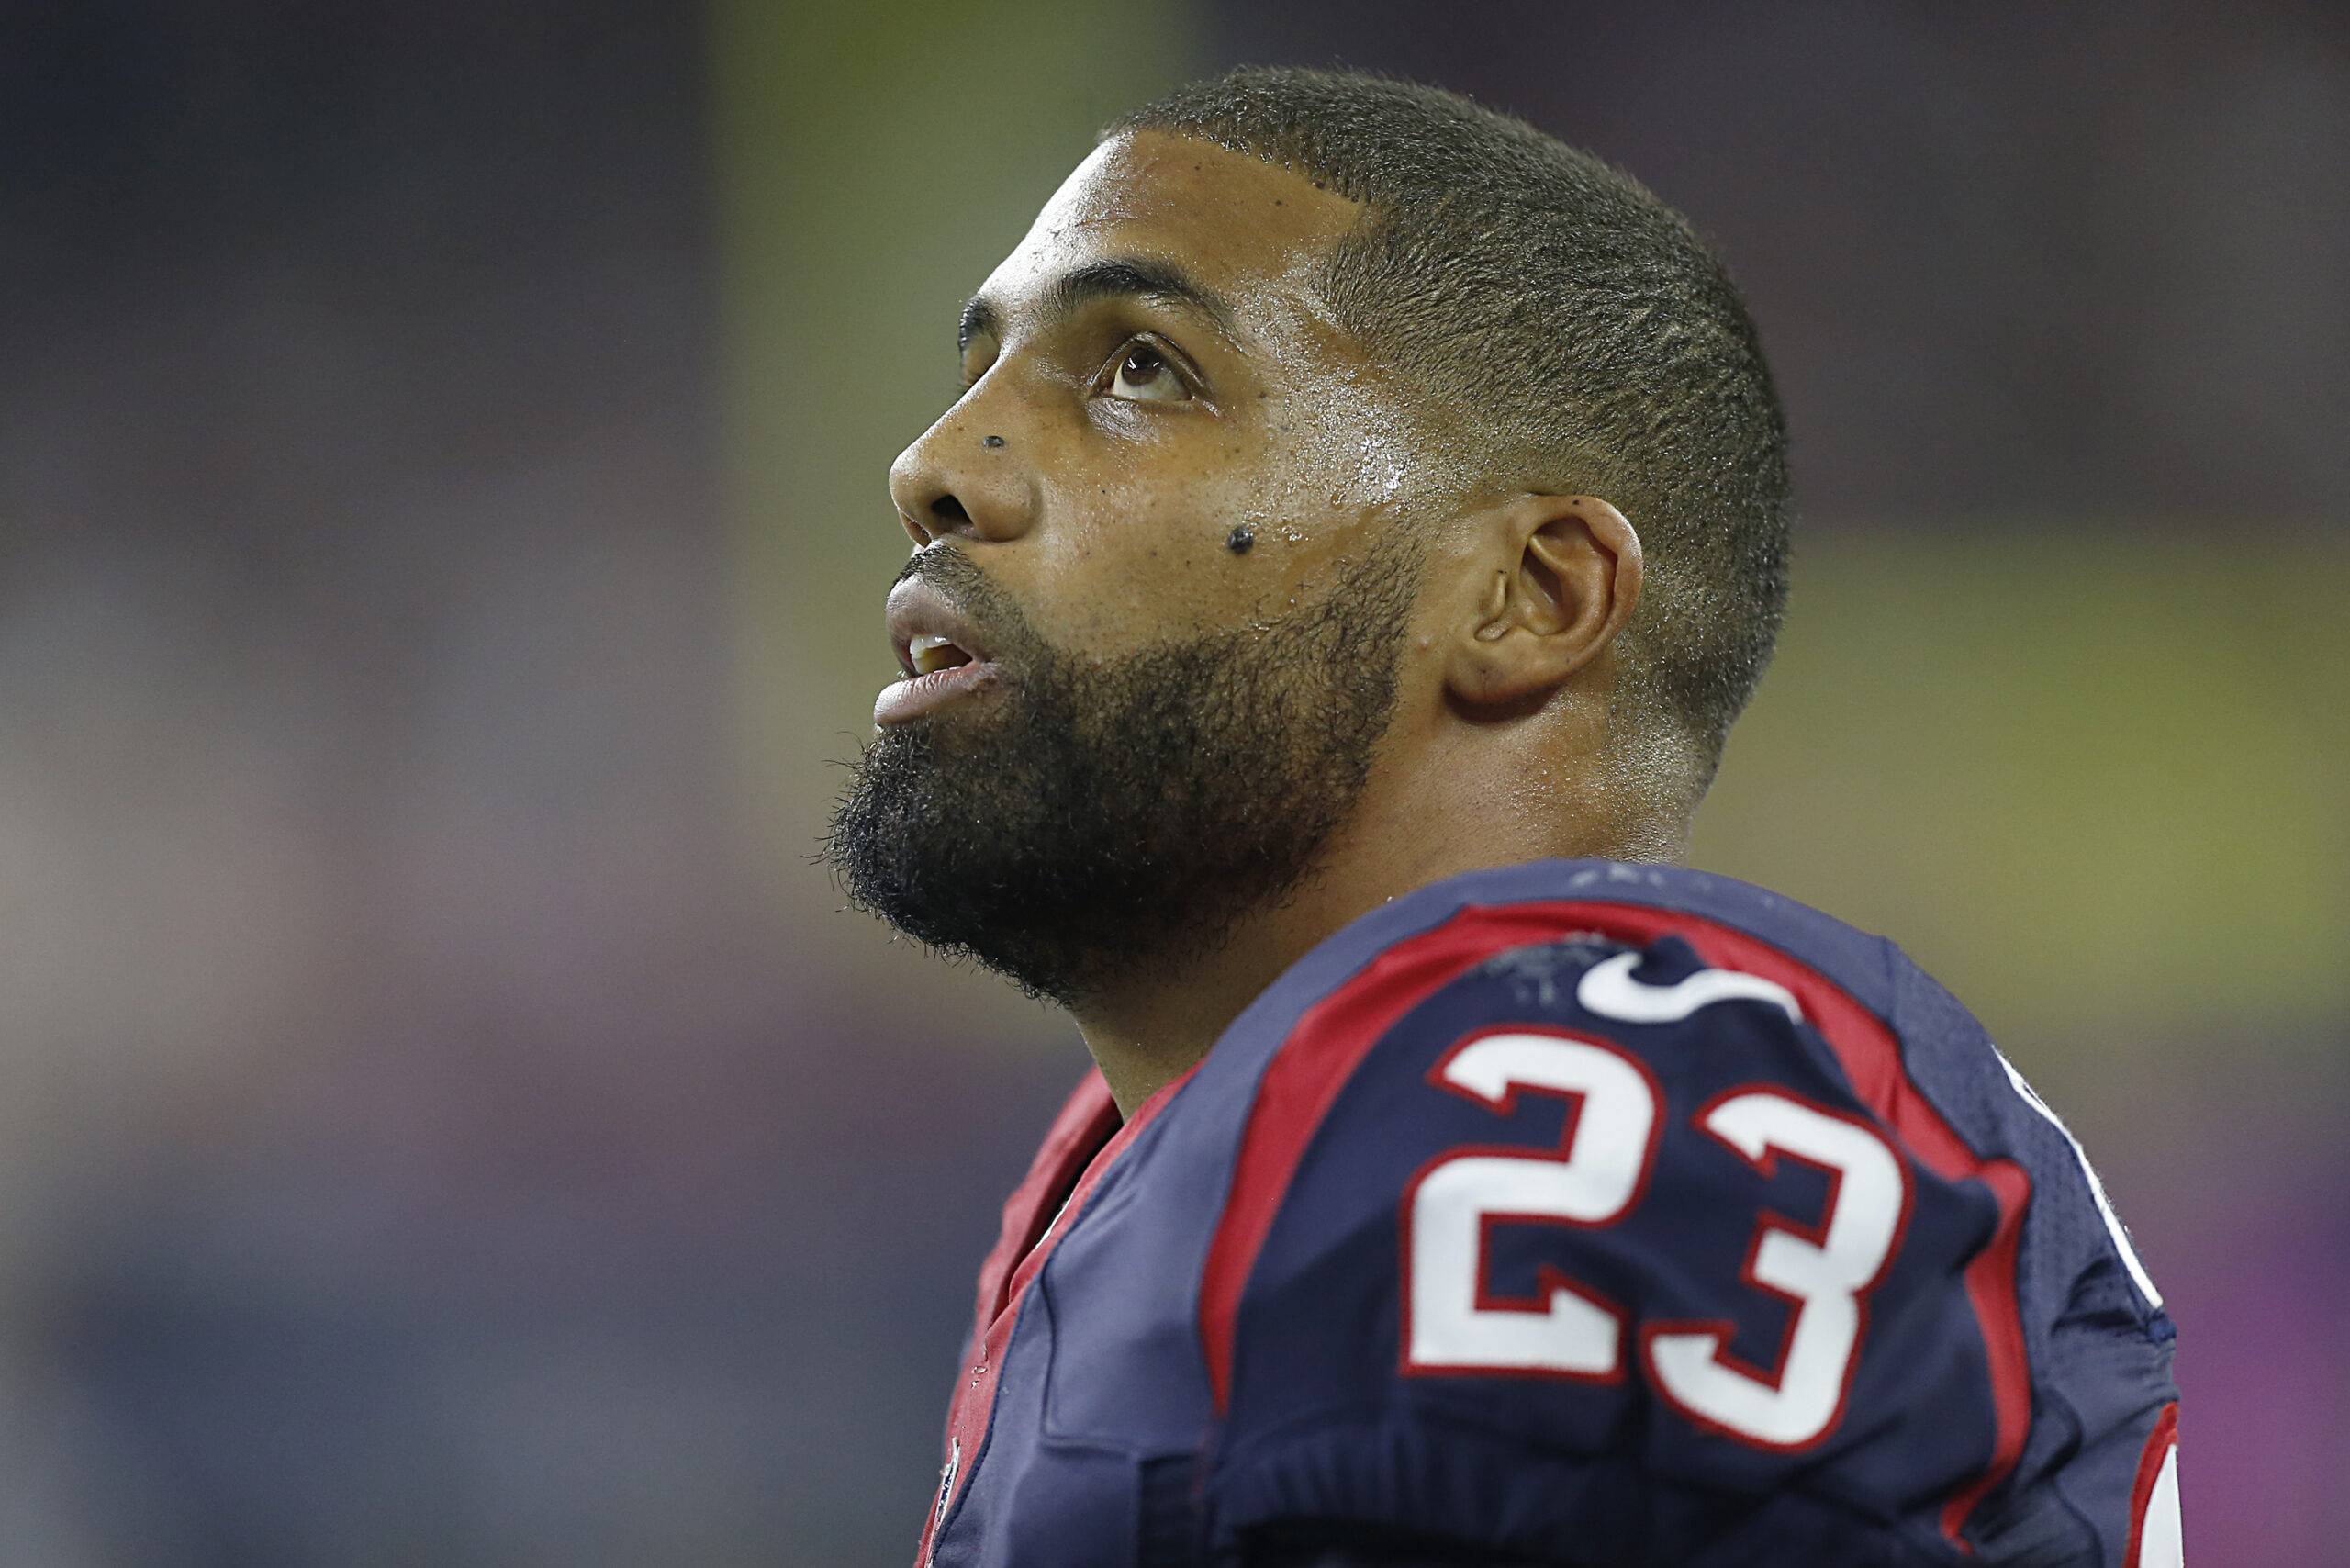 Arian Foster of the Houston Texans